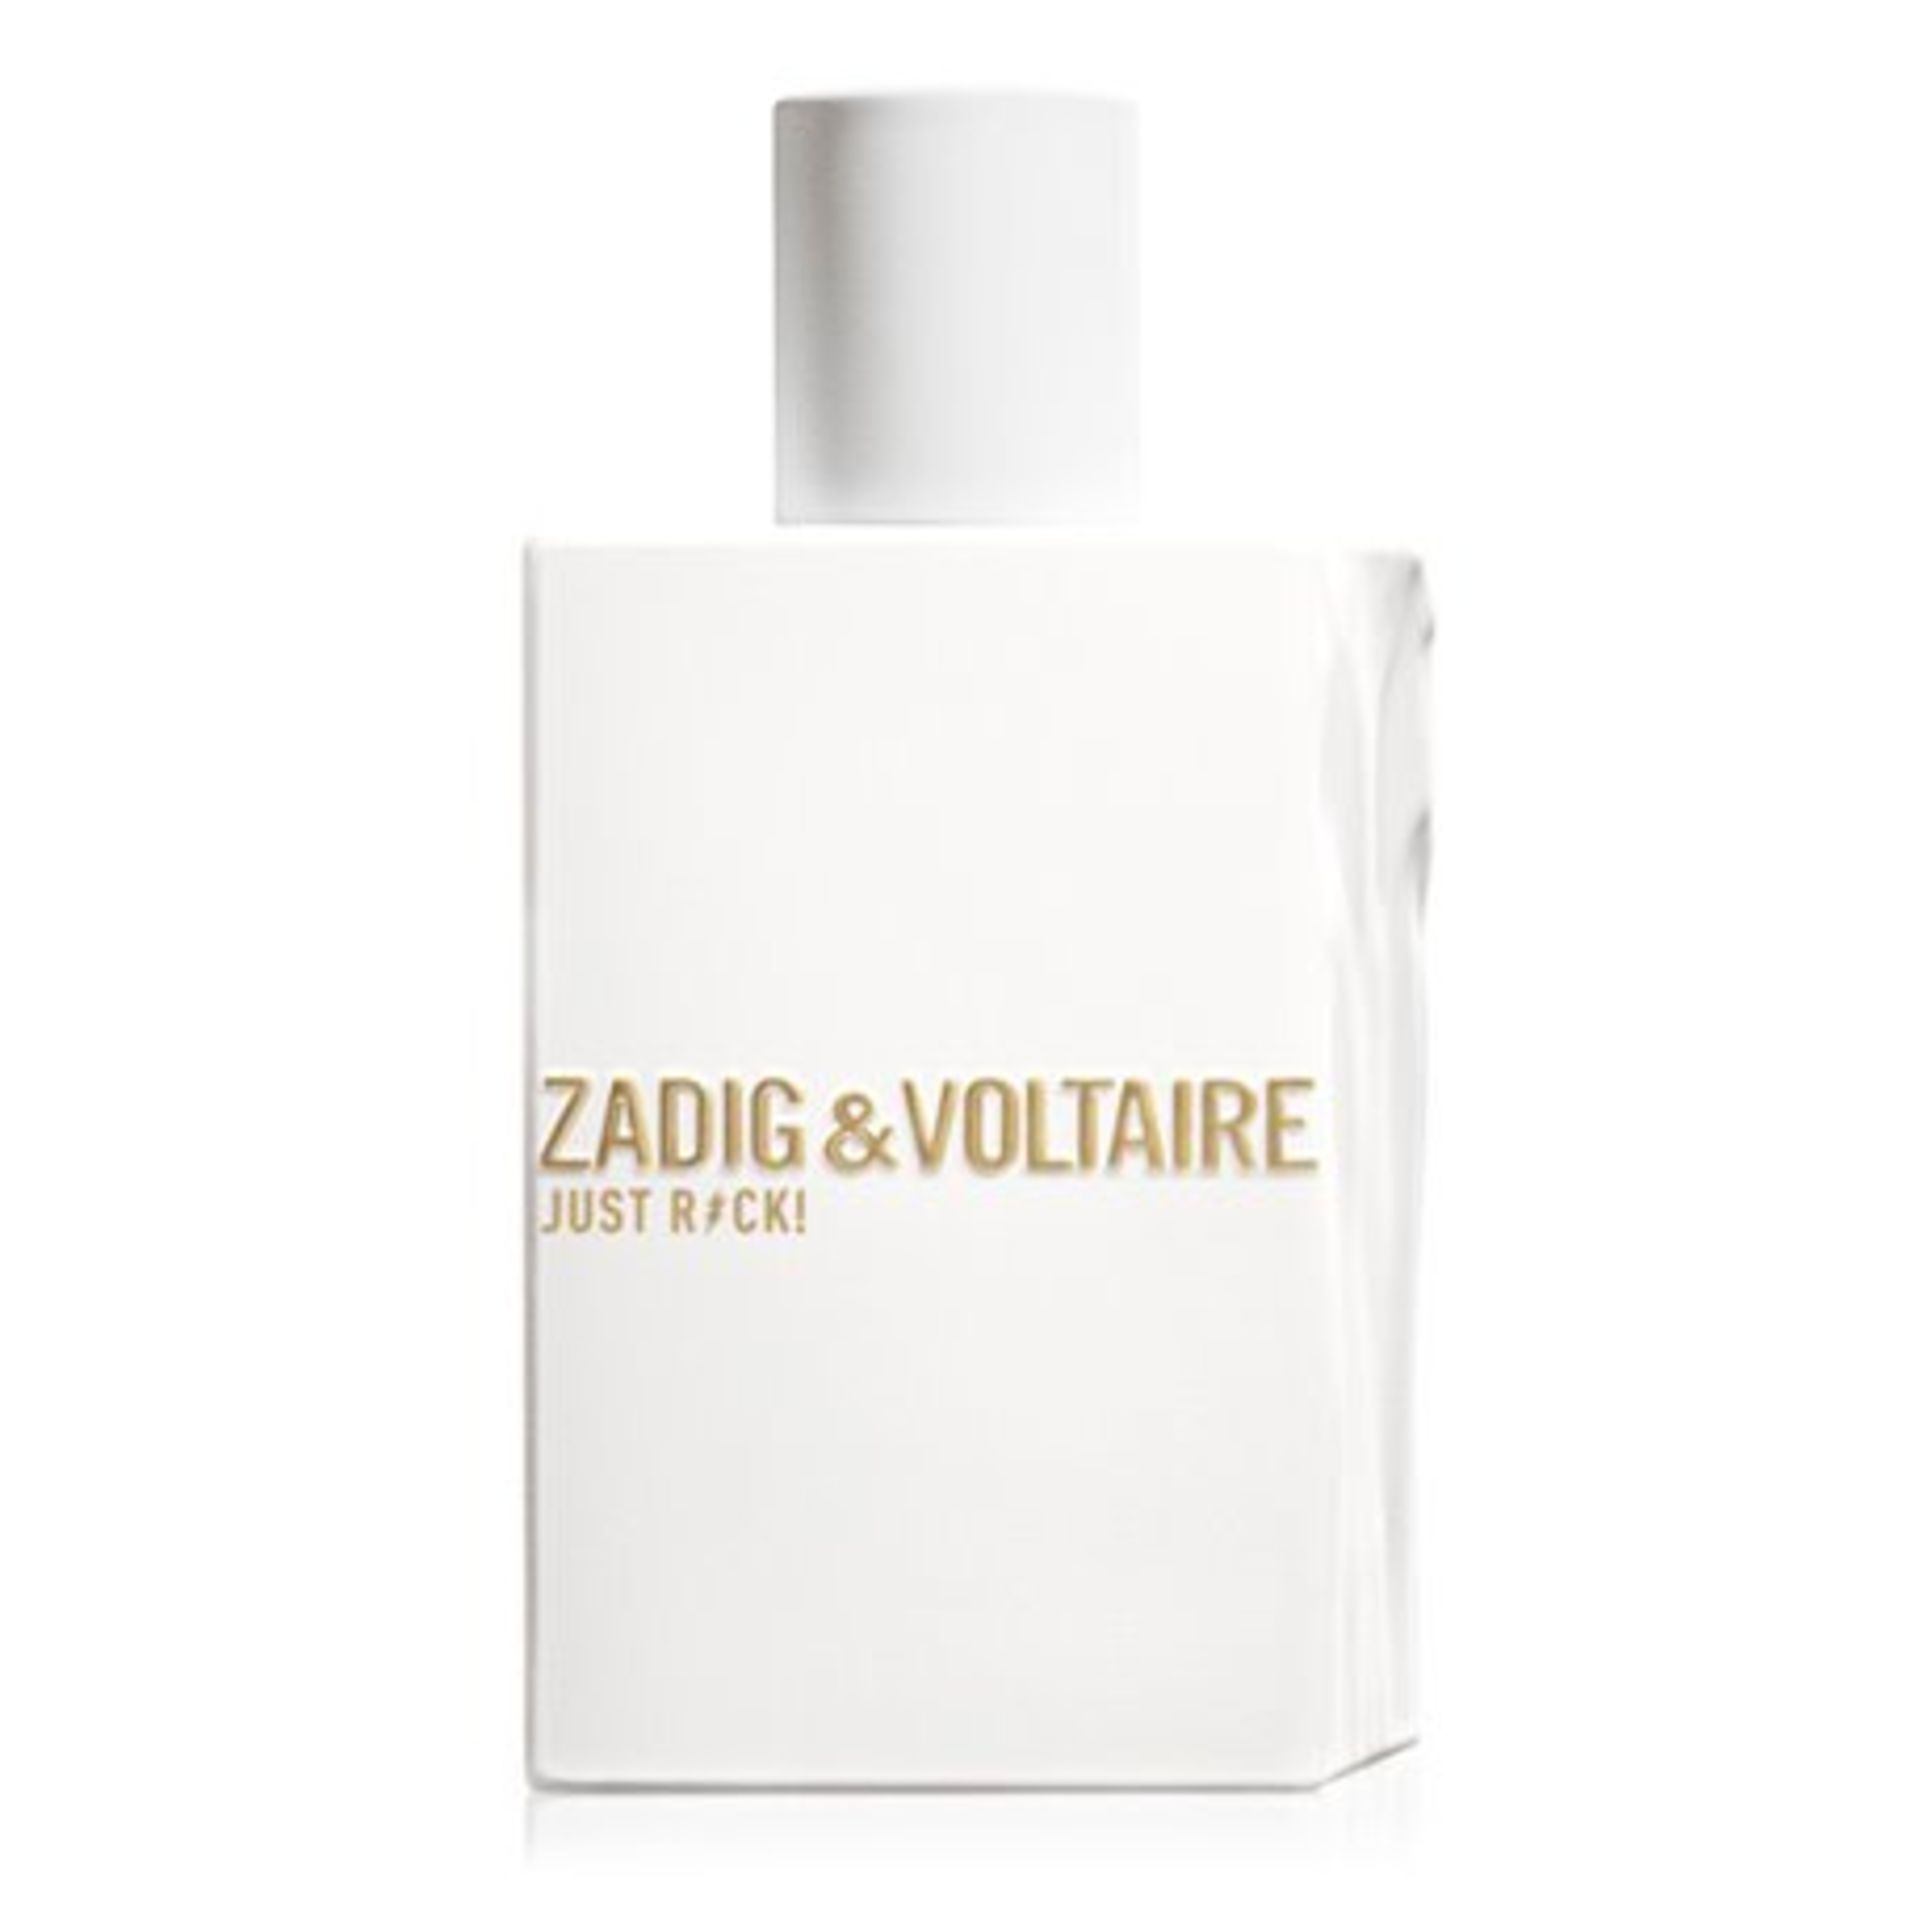 V Brand New Zadig & Voltaire (L)Just Rock! 50ml edp.